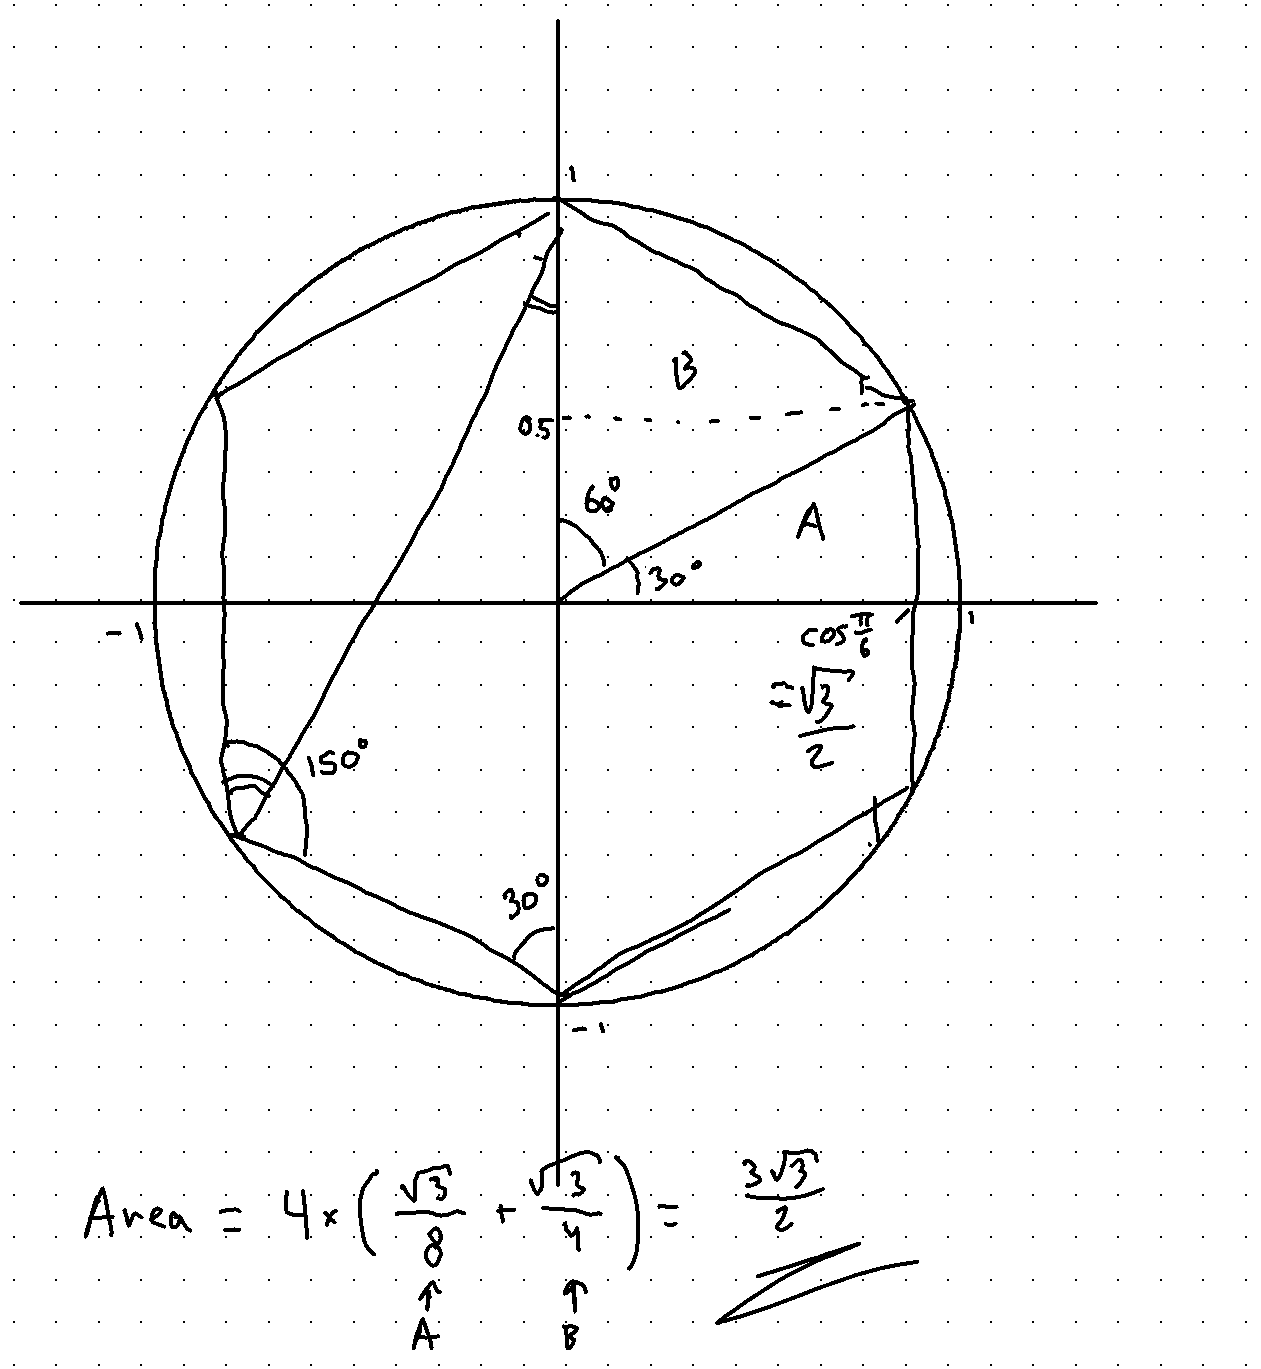 A regular hexagon inscribed in a unit circle. Various angles within the hexagon are shown, and the hexagon is split up into four regions in the four quadrants. The area of each region is computed, and the total is shown as 3 times the square root of 3 divided by 2.